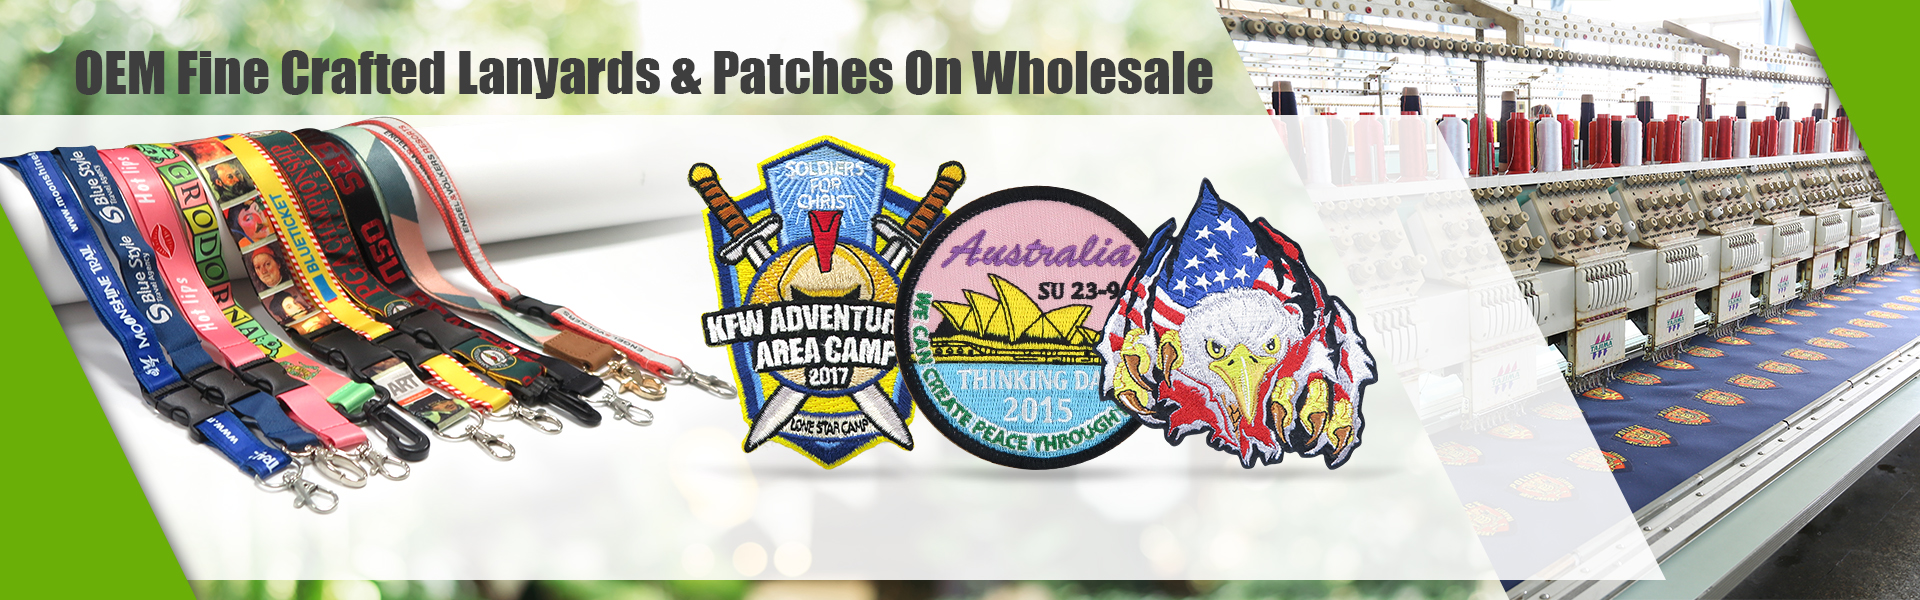 OEM fine crafted lanyards & patches on wholesale